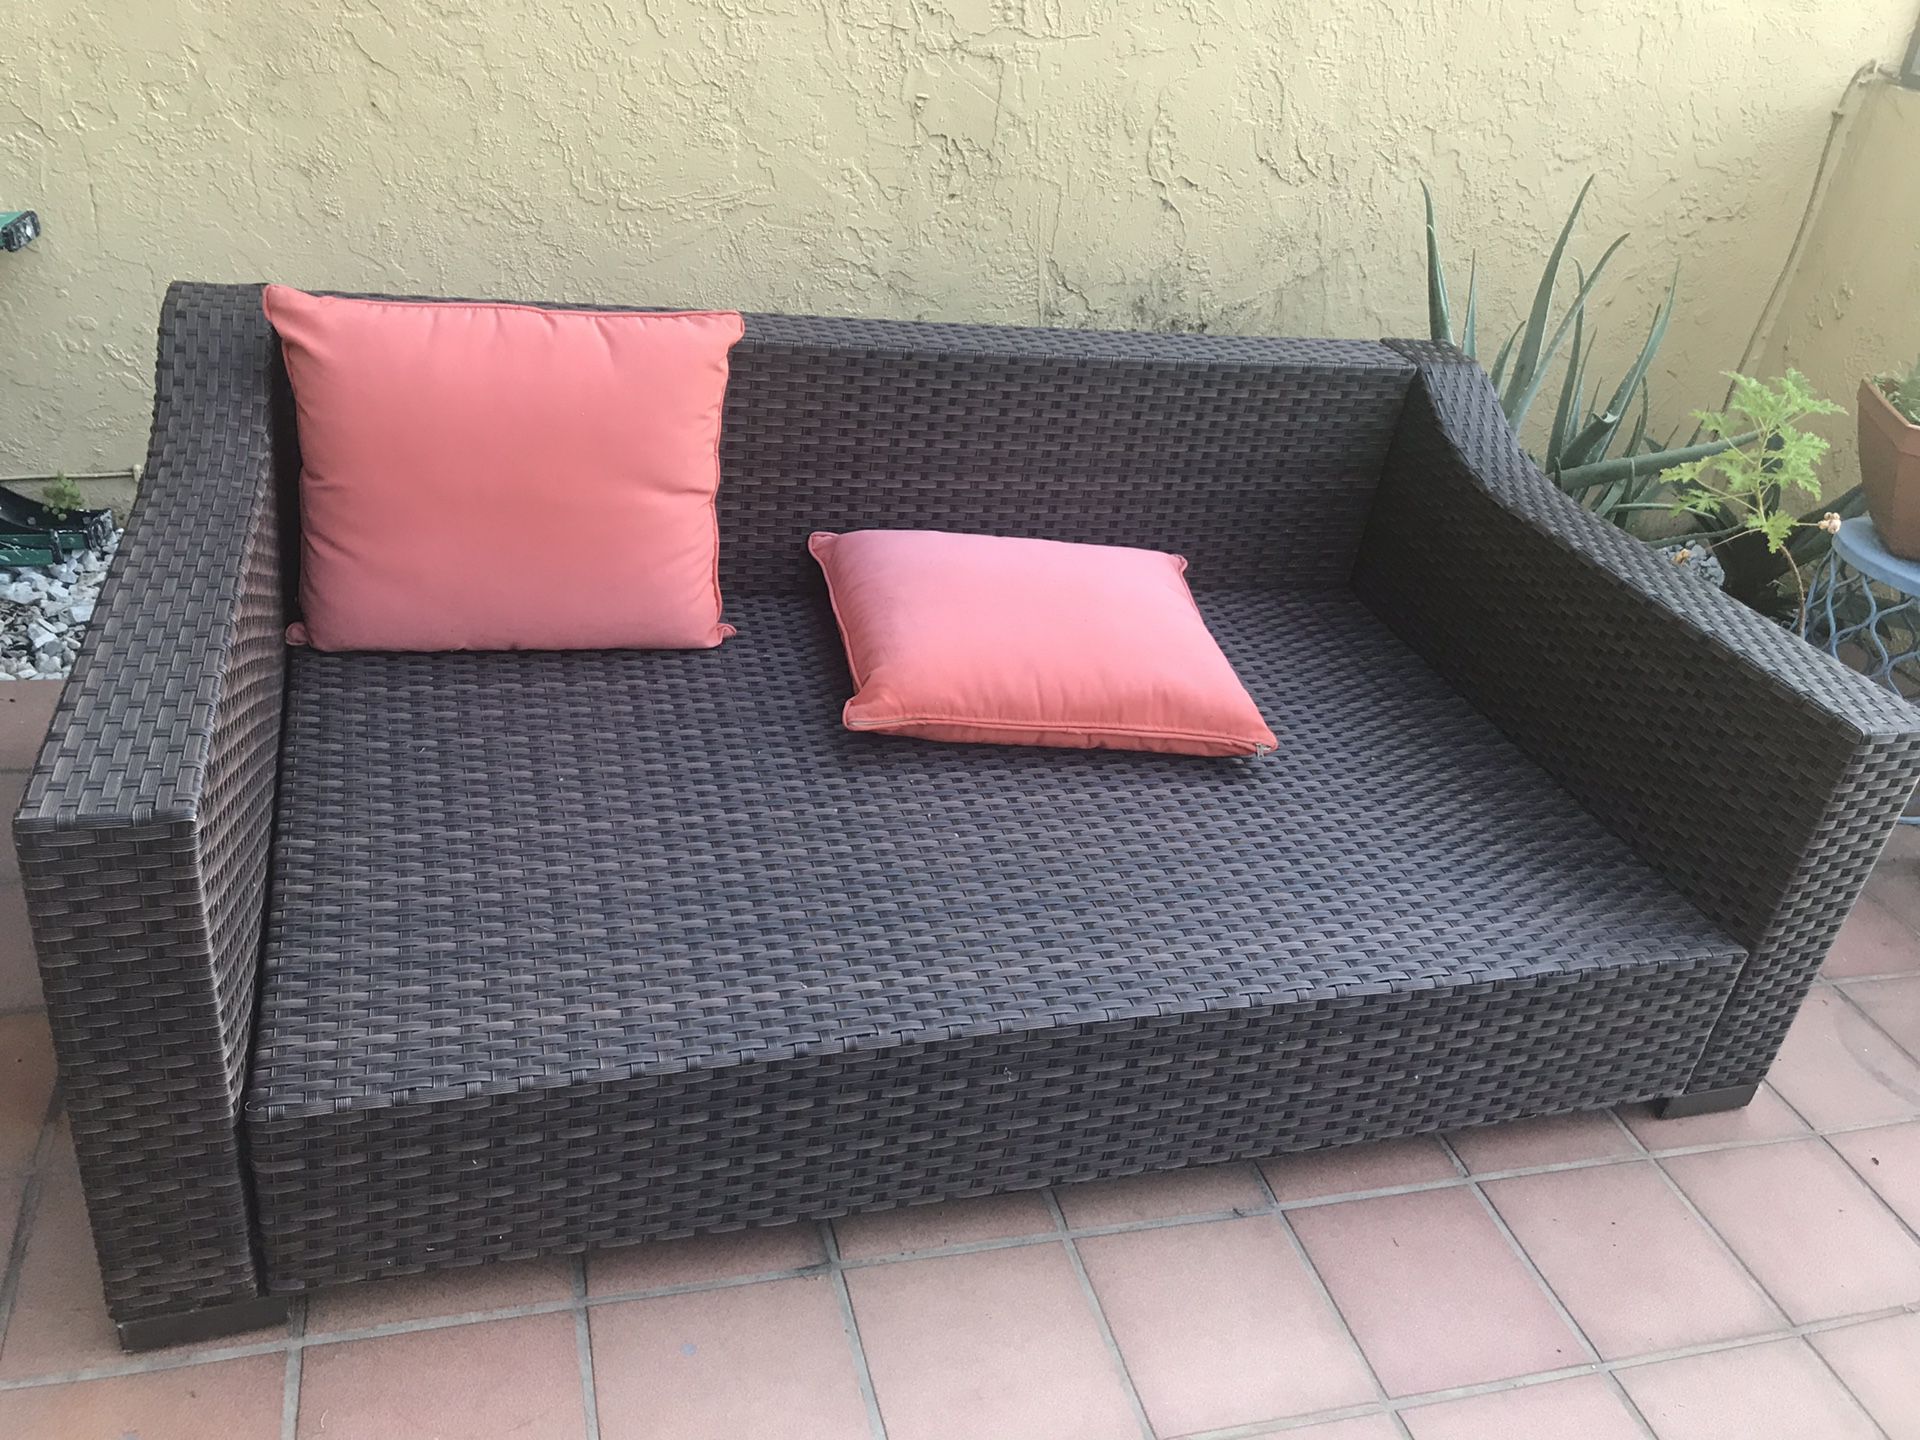 Patio furniture for sale